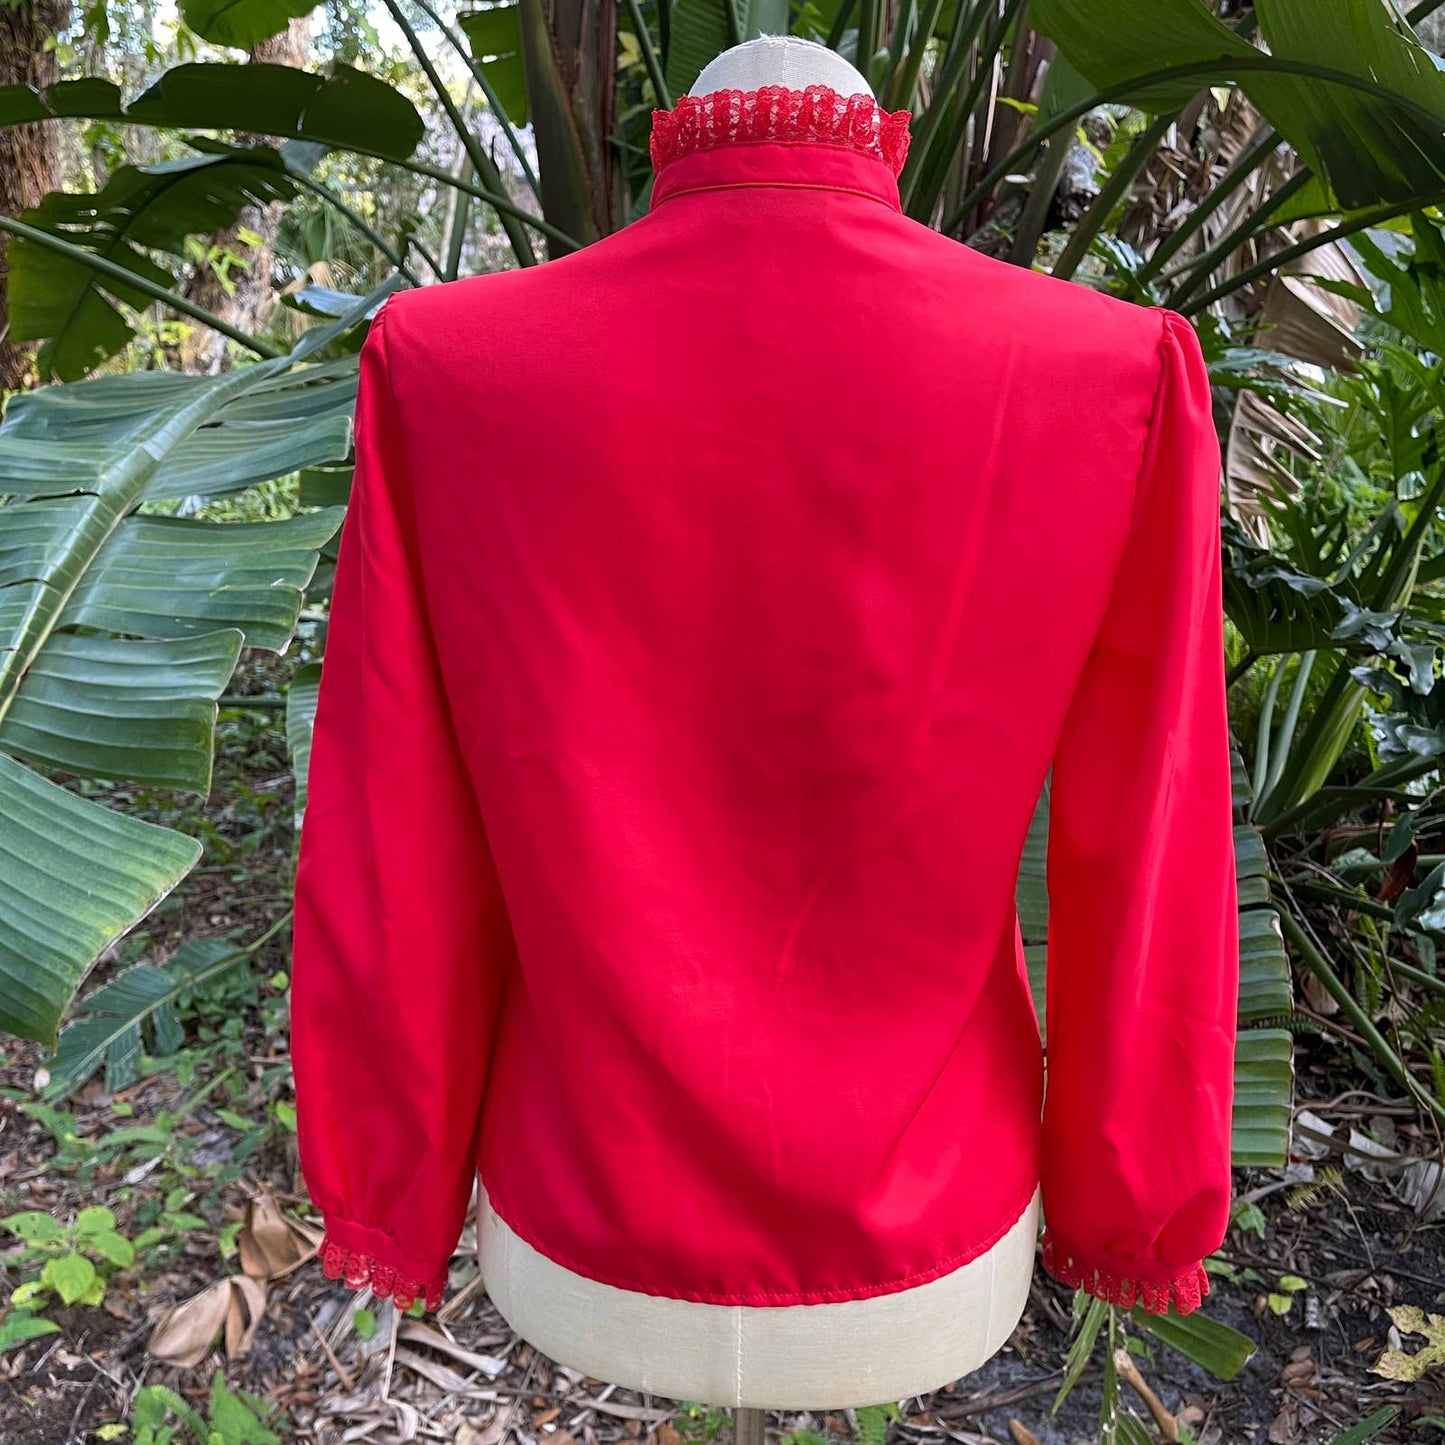 Vintage 80s Bright Red Tuxedo Ruffle Button Up Blouse Rhapsody Size M L